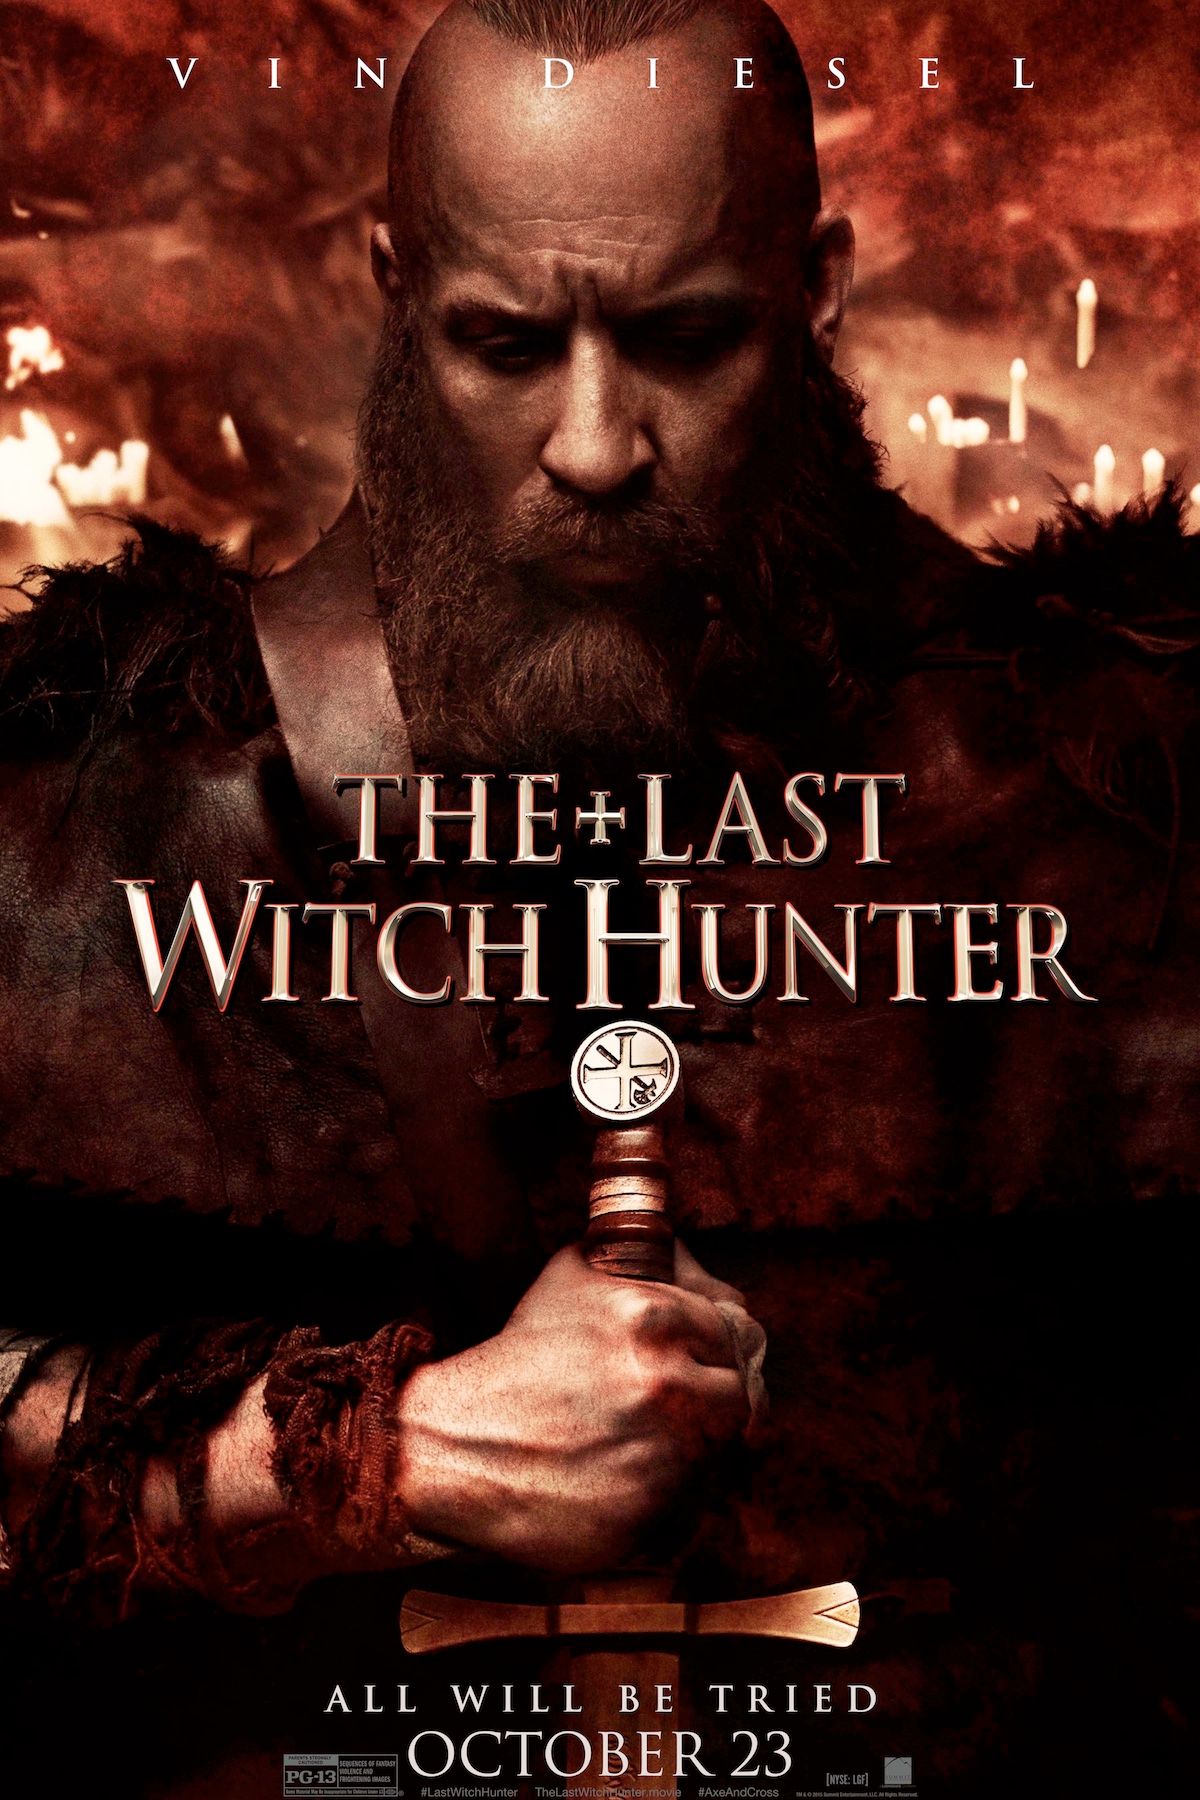 Vin Diesel in The Last Witch Hunter Poster